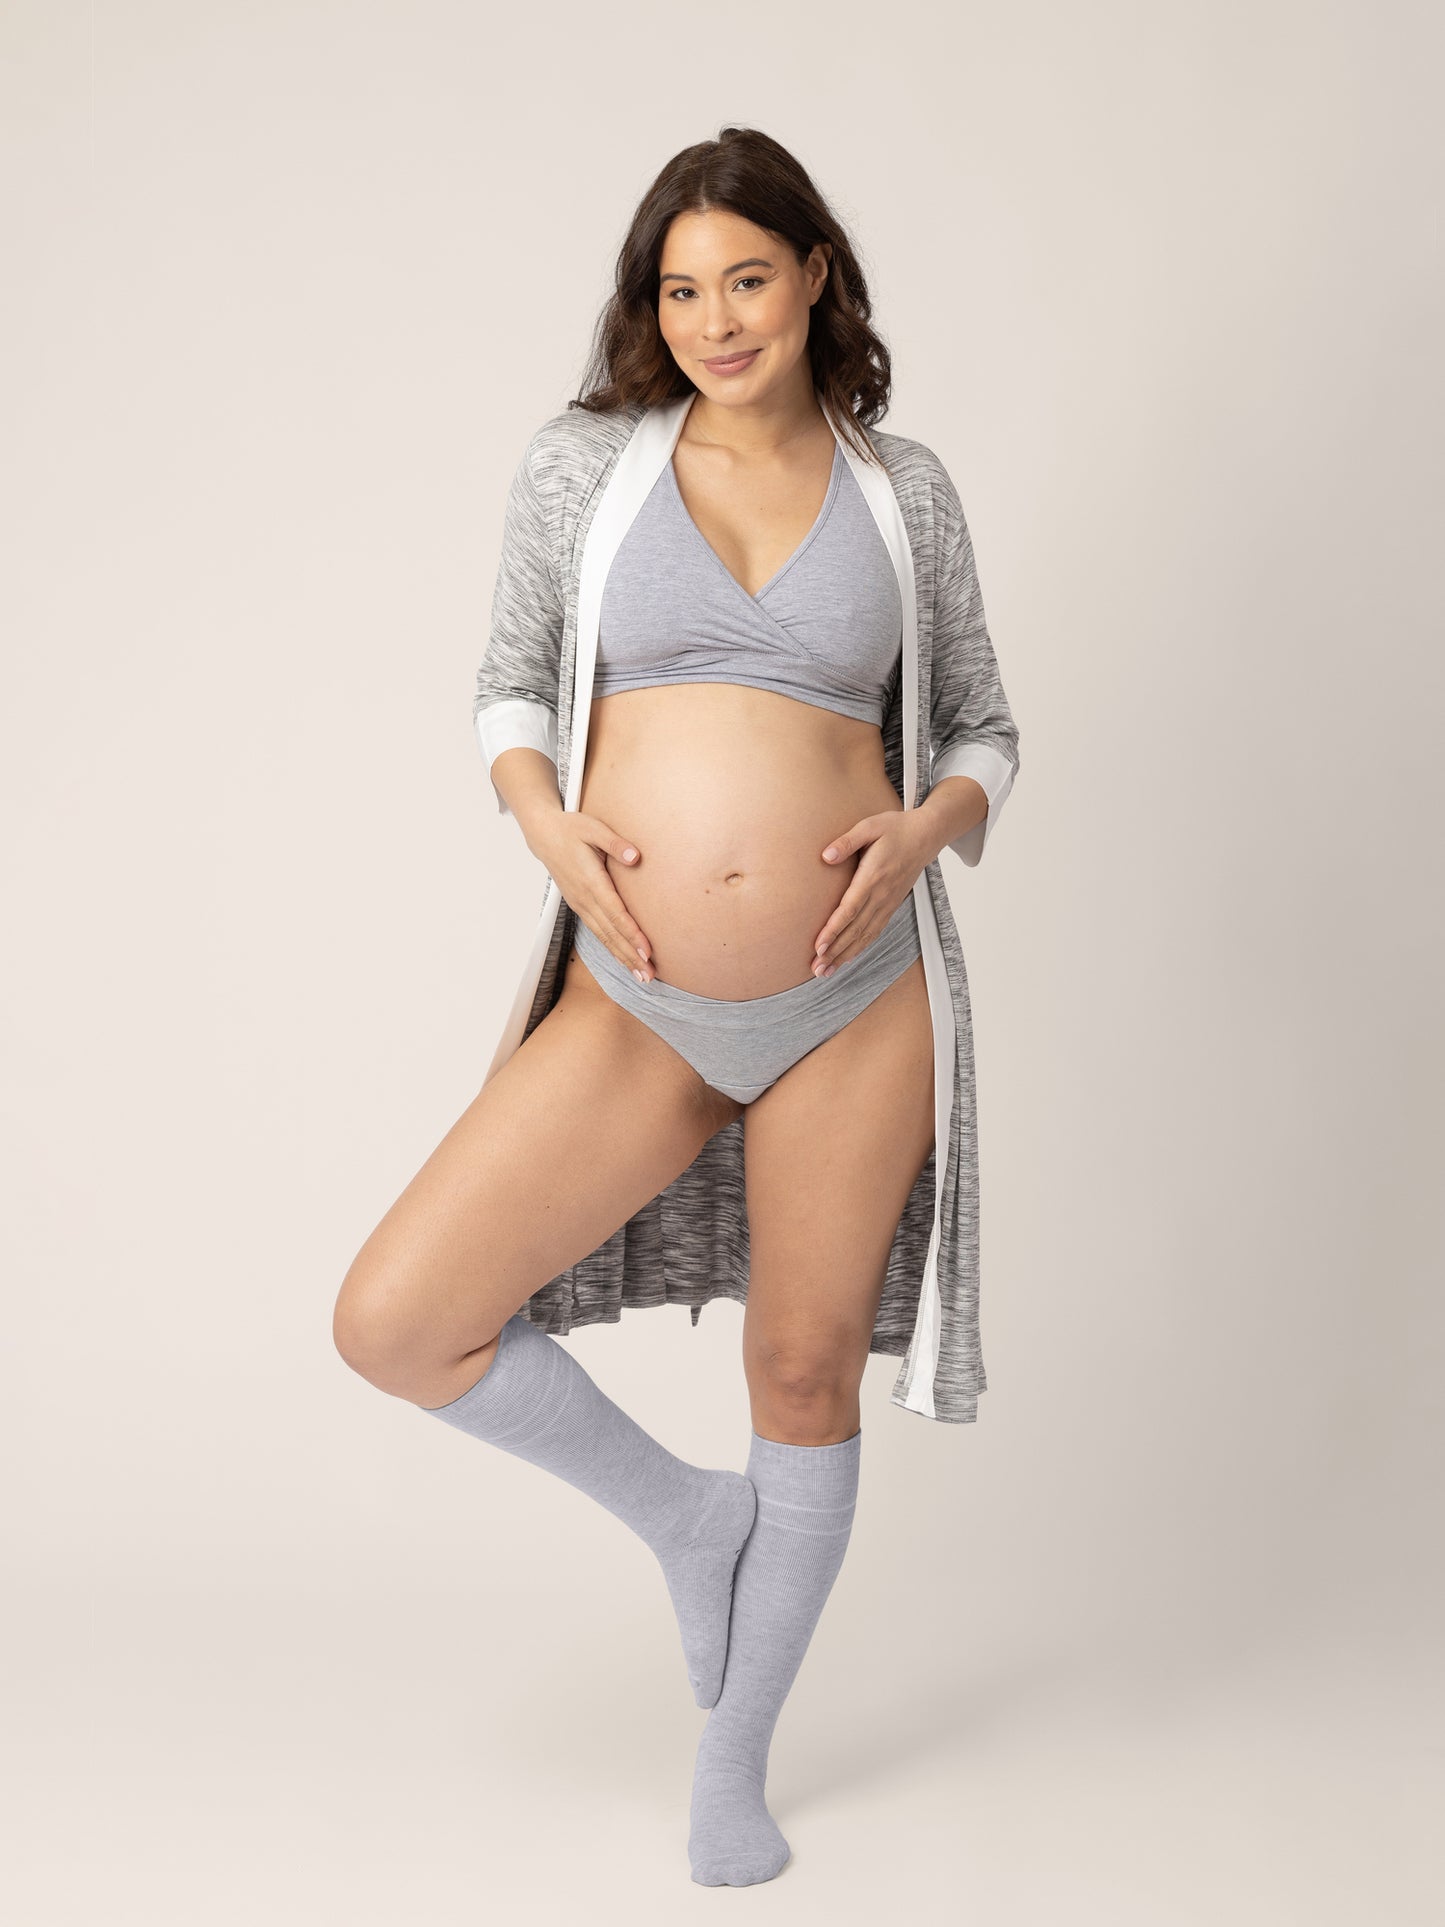 The Best Compression Socks for Pregnancy